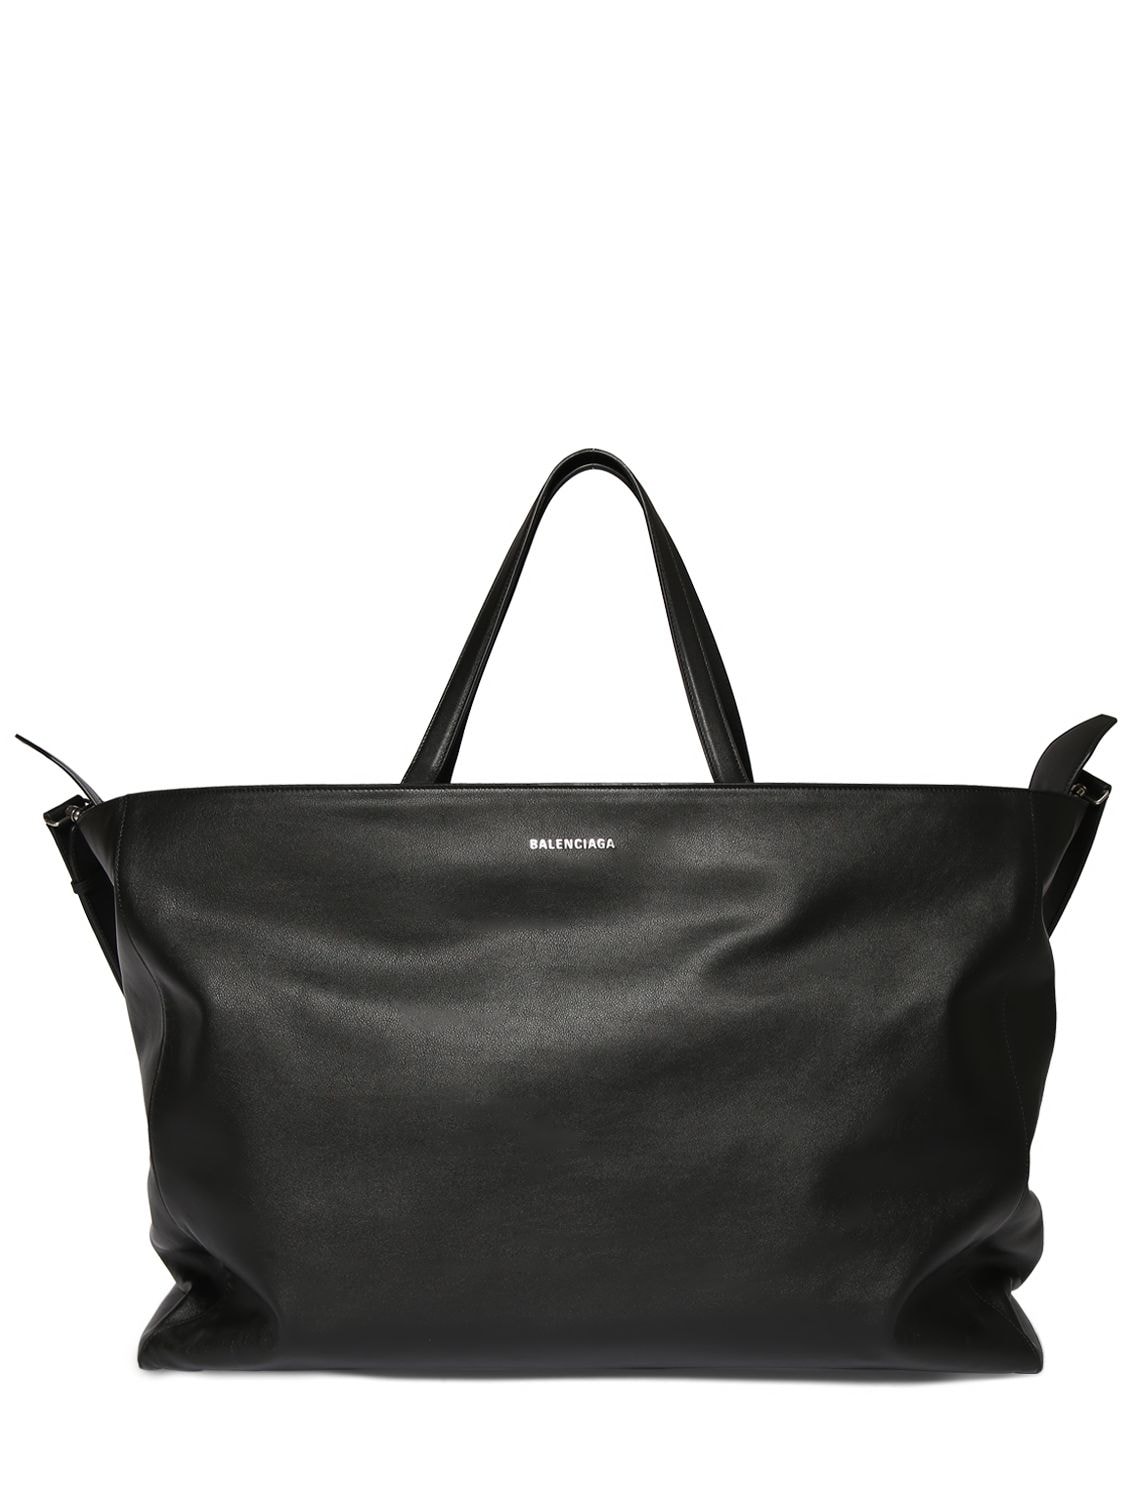 Image of Xl Carryall Leather Tote Bag